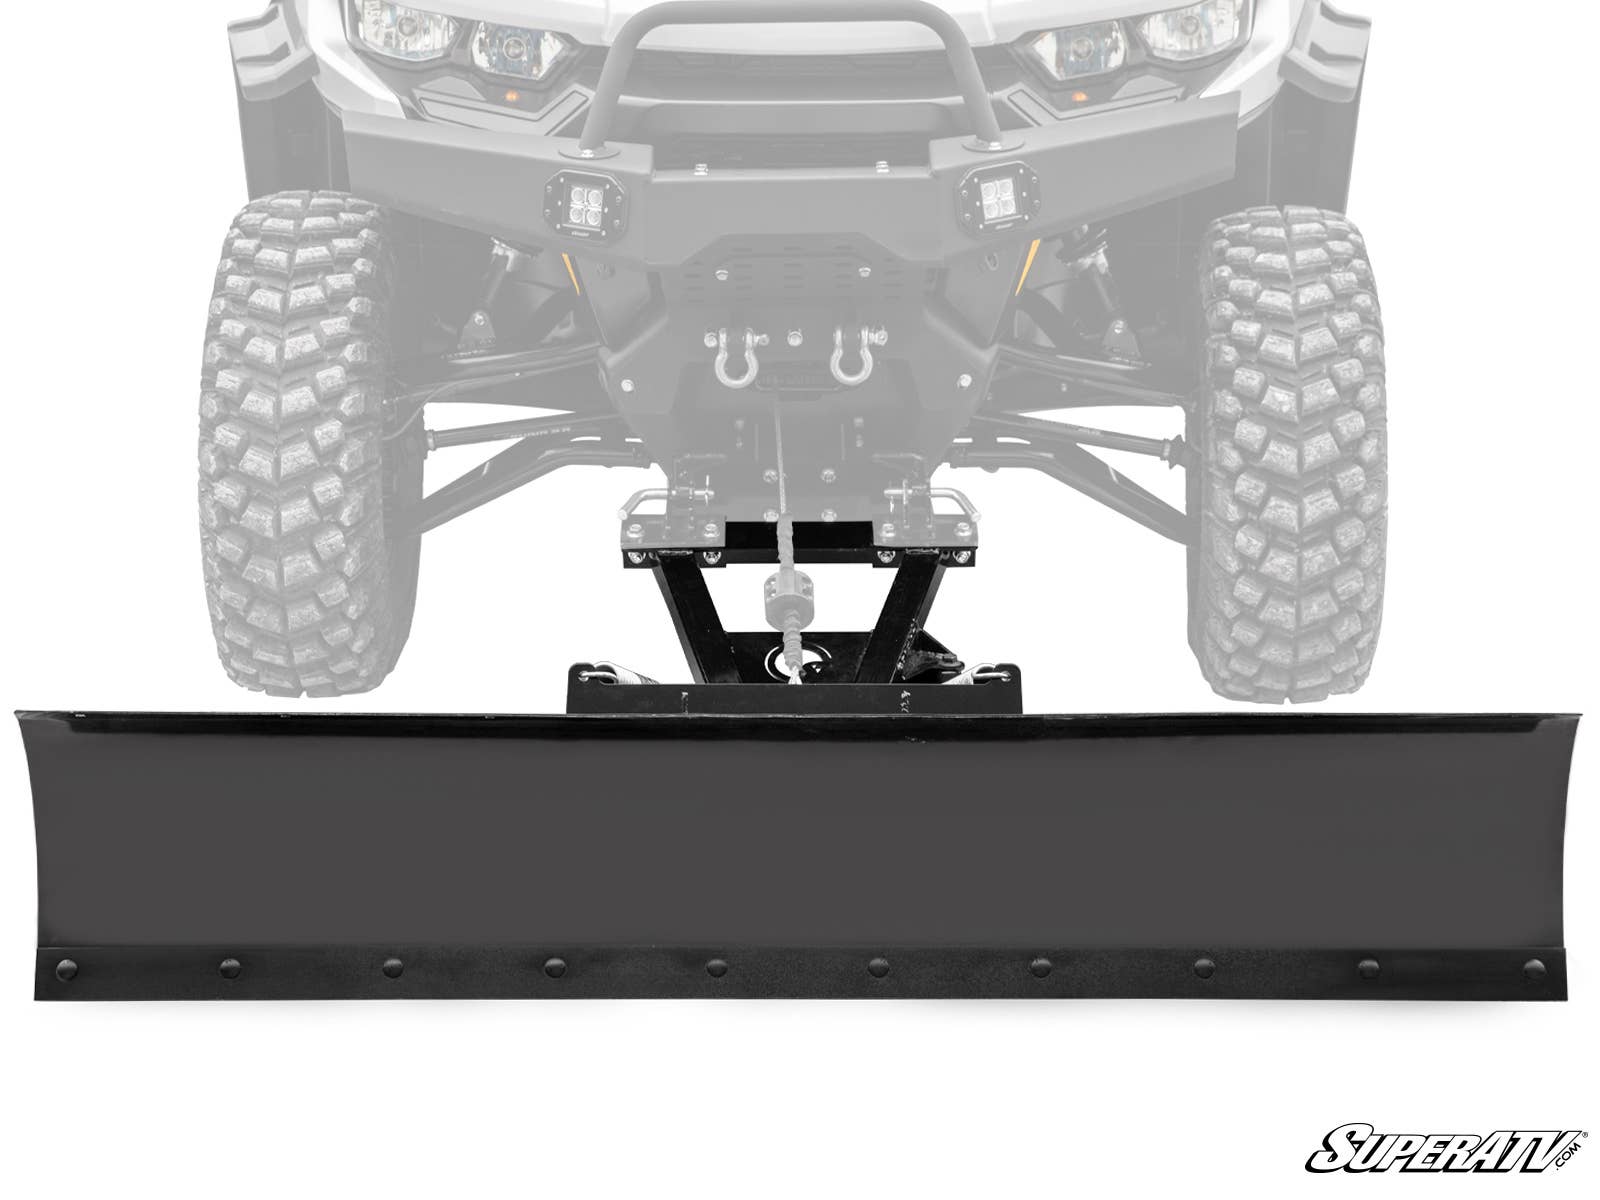 PLOW PRO SNOW PLOW BLADE AND FRAME KIT